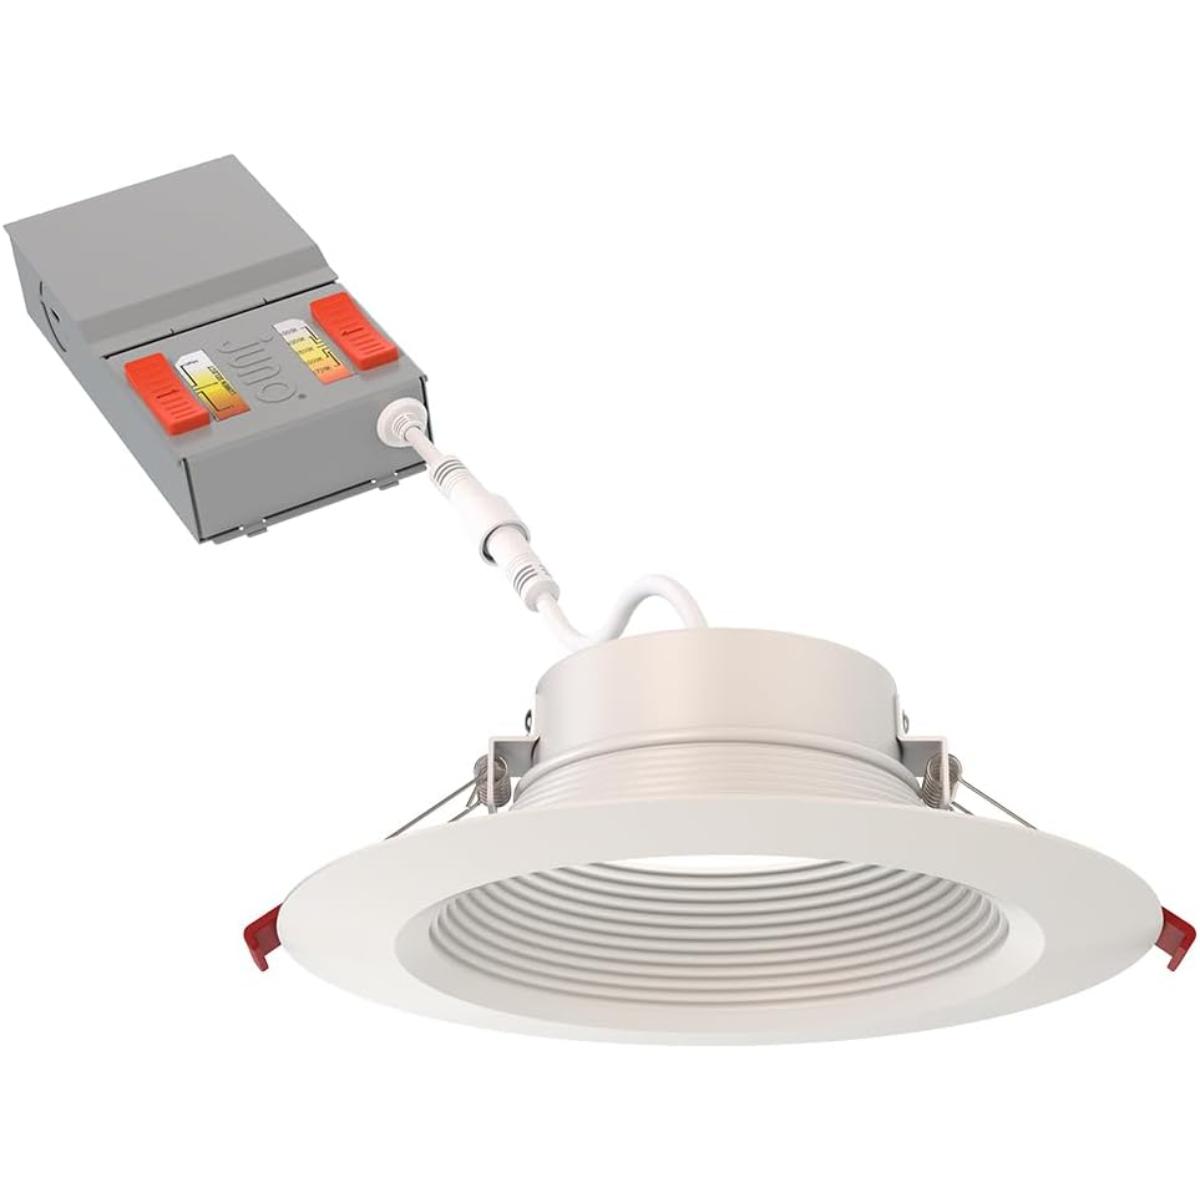 6 inch Wafer Canless LED Recessed Light, 16 Watt, 1300 Lumens, Selectable CCT, 2700K to 5000K, Baffle Trim - Bees Lighting